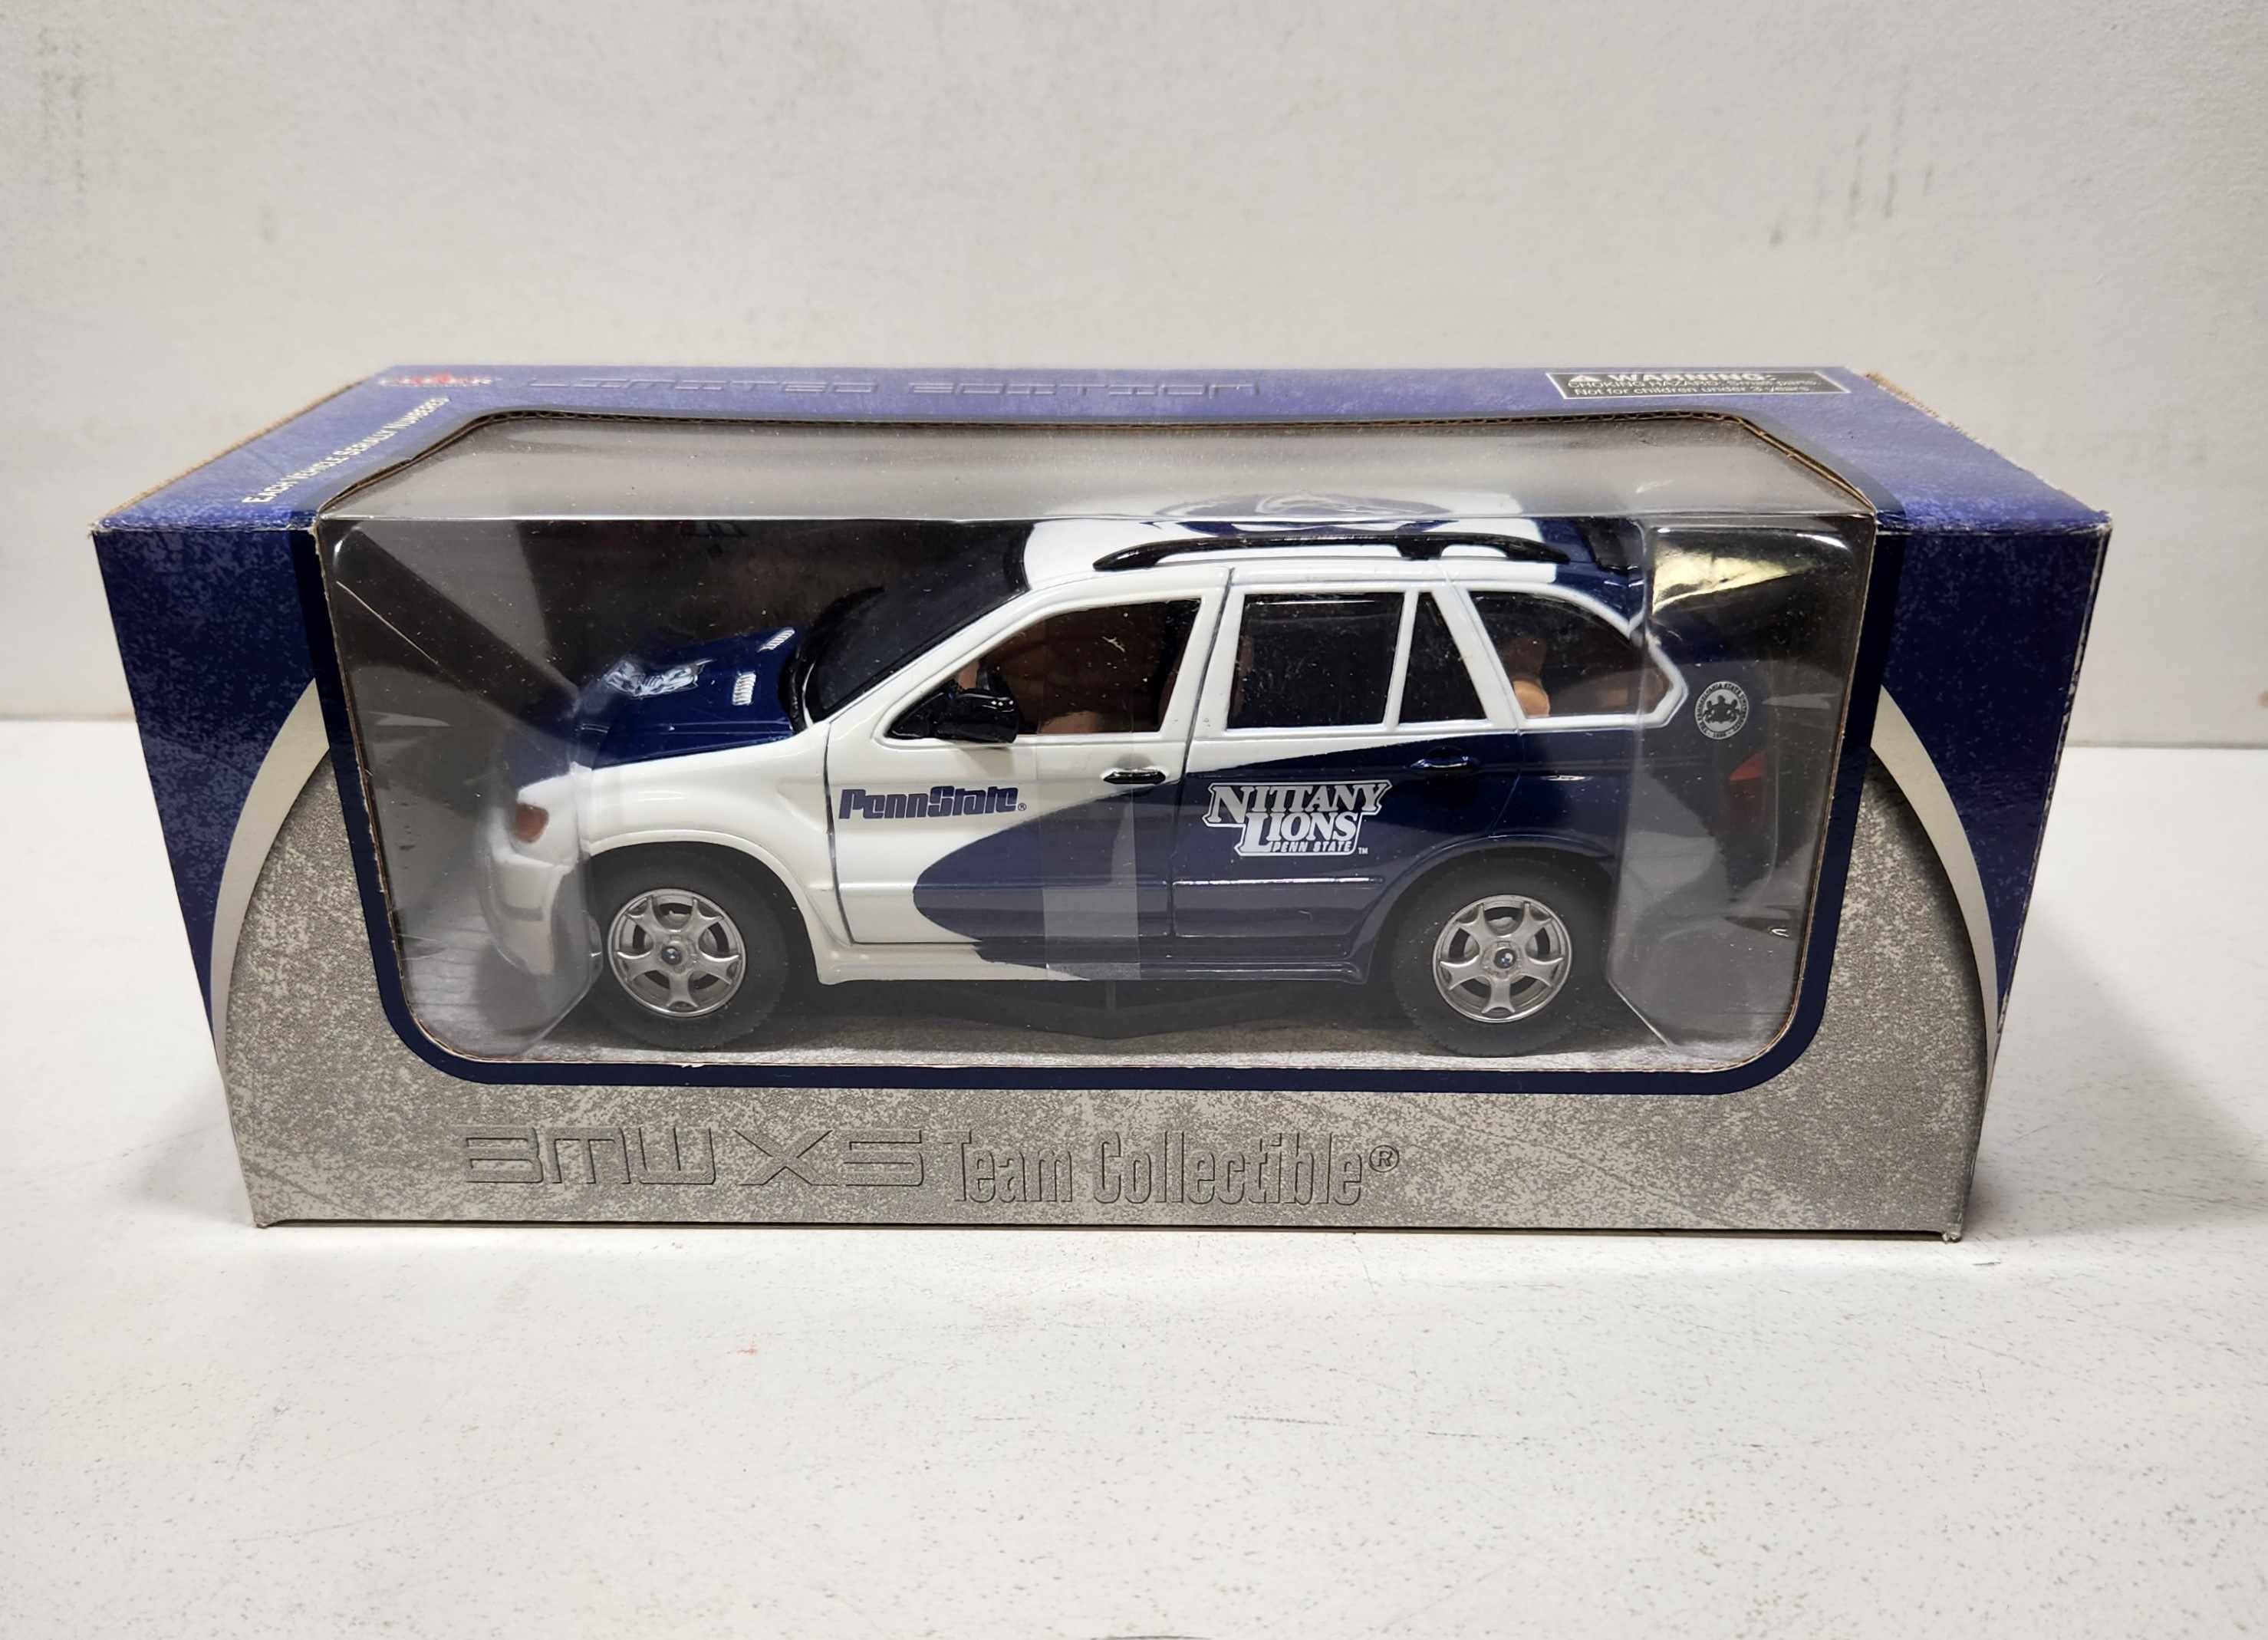 2002 Penn State 1/24th Nittany Lions BMW